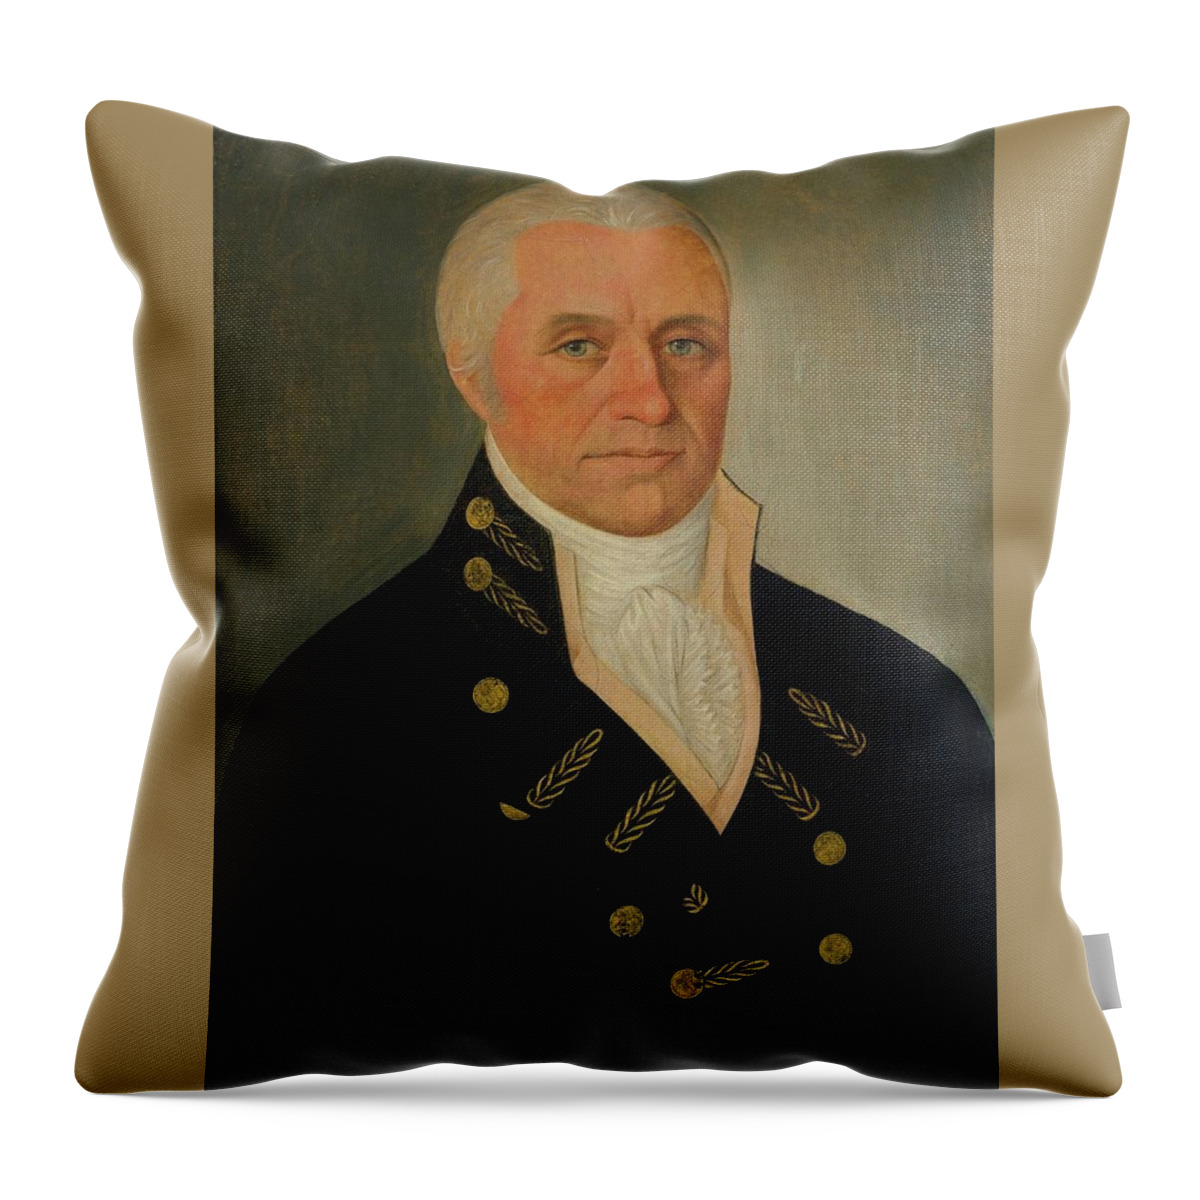 Attributed To Spoilum 1770 - 1810 British Sea Captain Throw Pillow featuring the painting British Sea Captain by MotionAge Designs